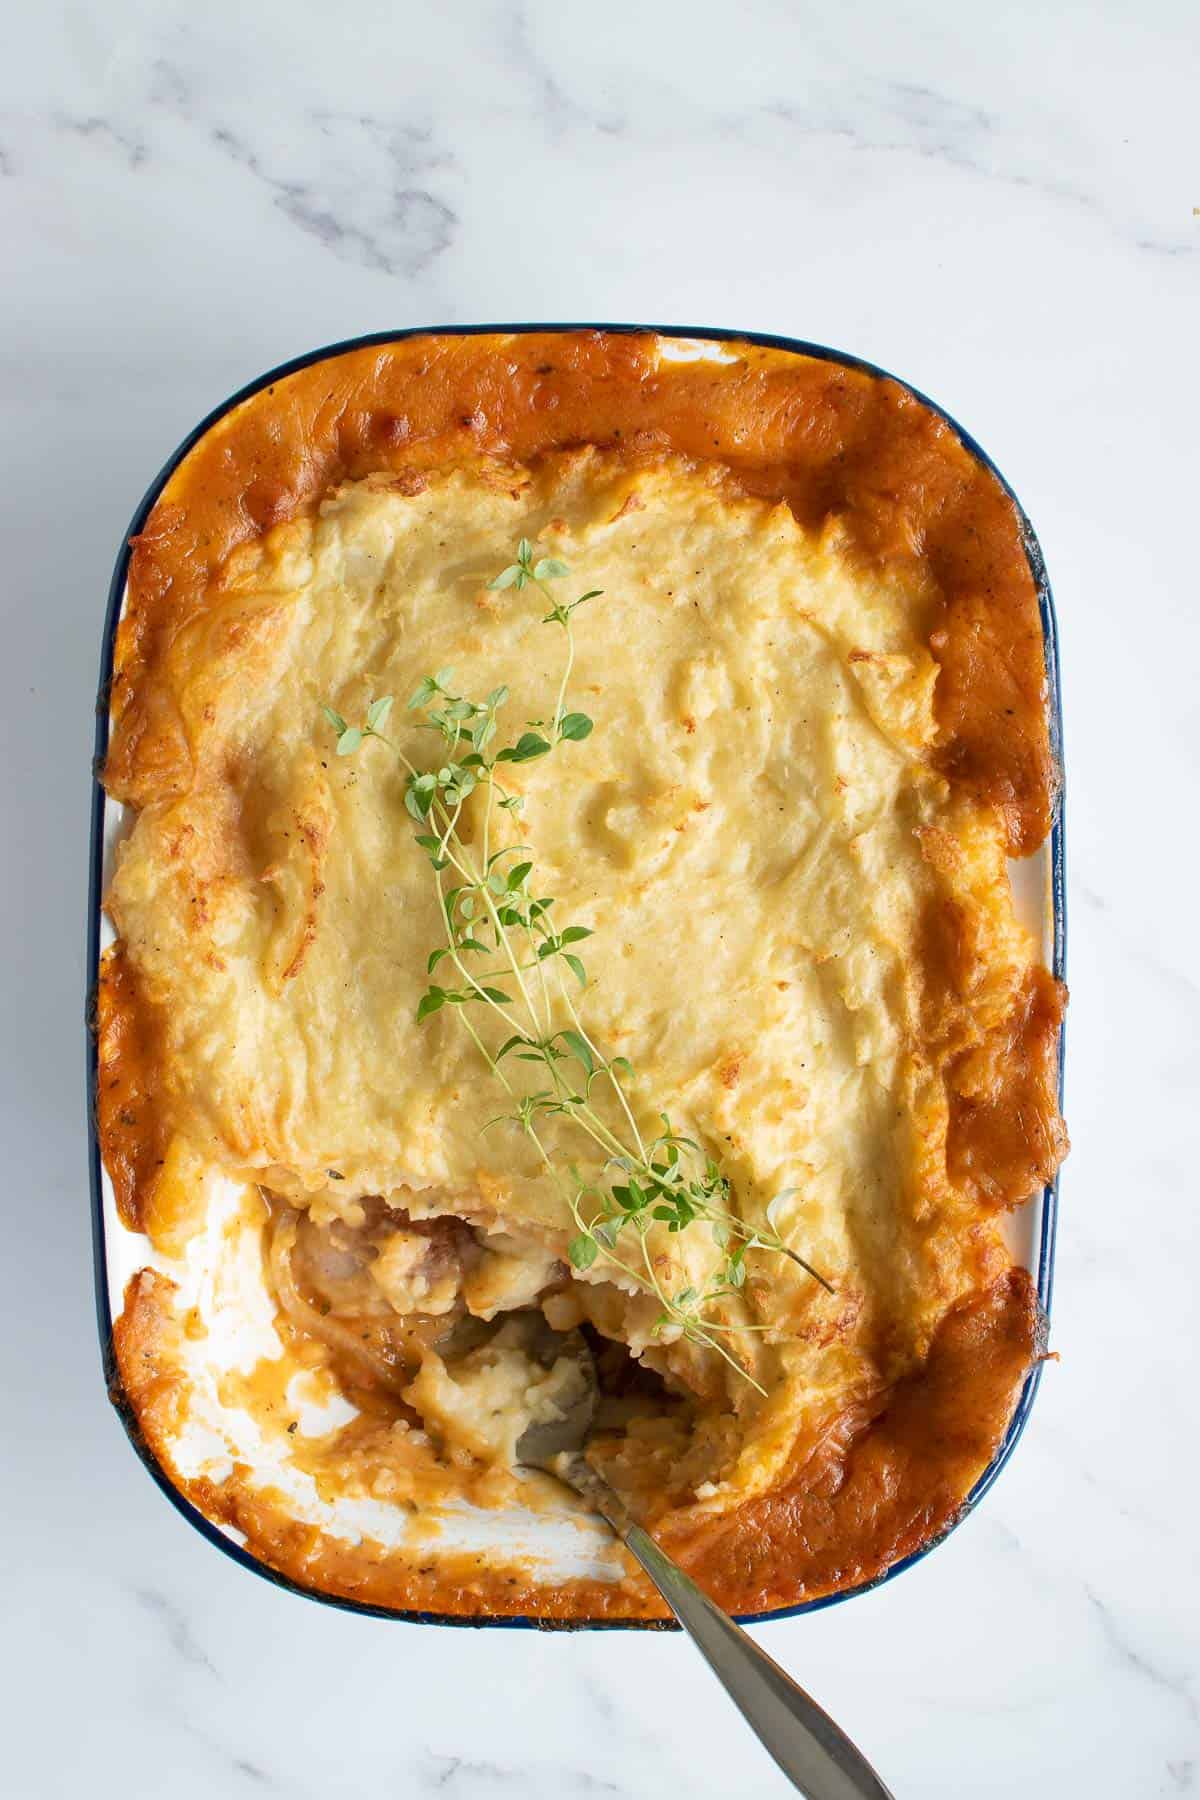 Sausage and mash pie, with a small serving removed from the dish.